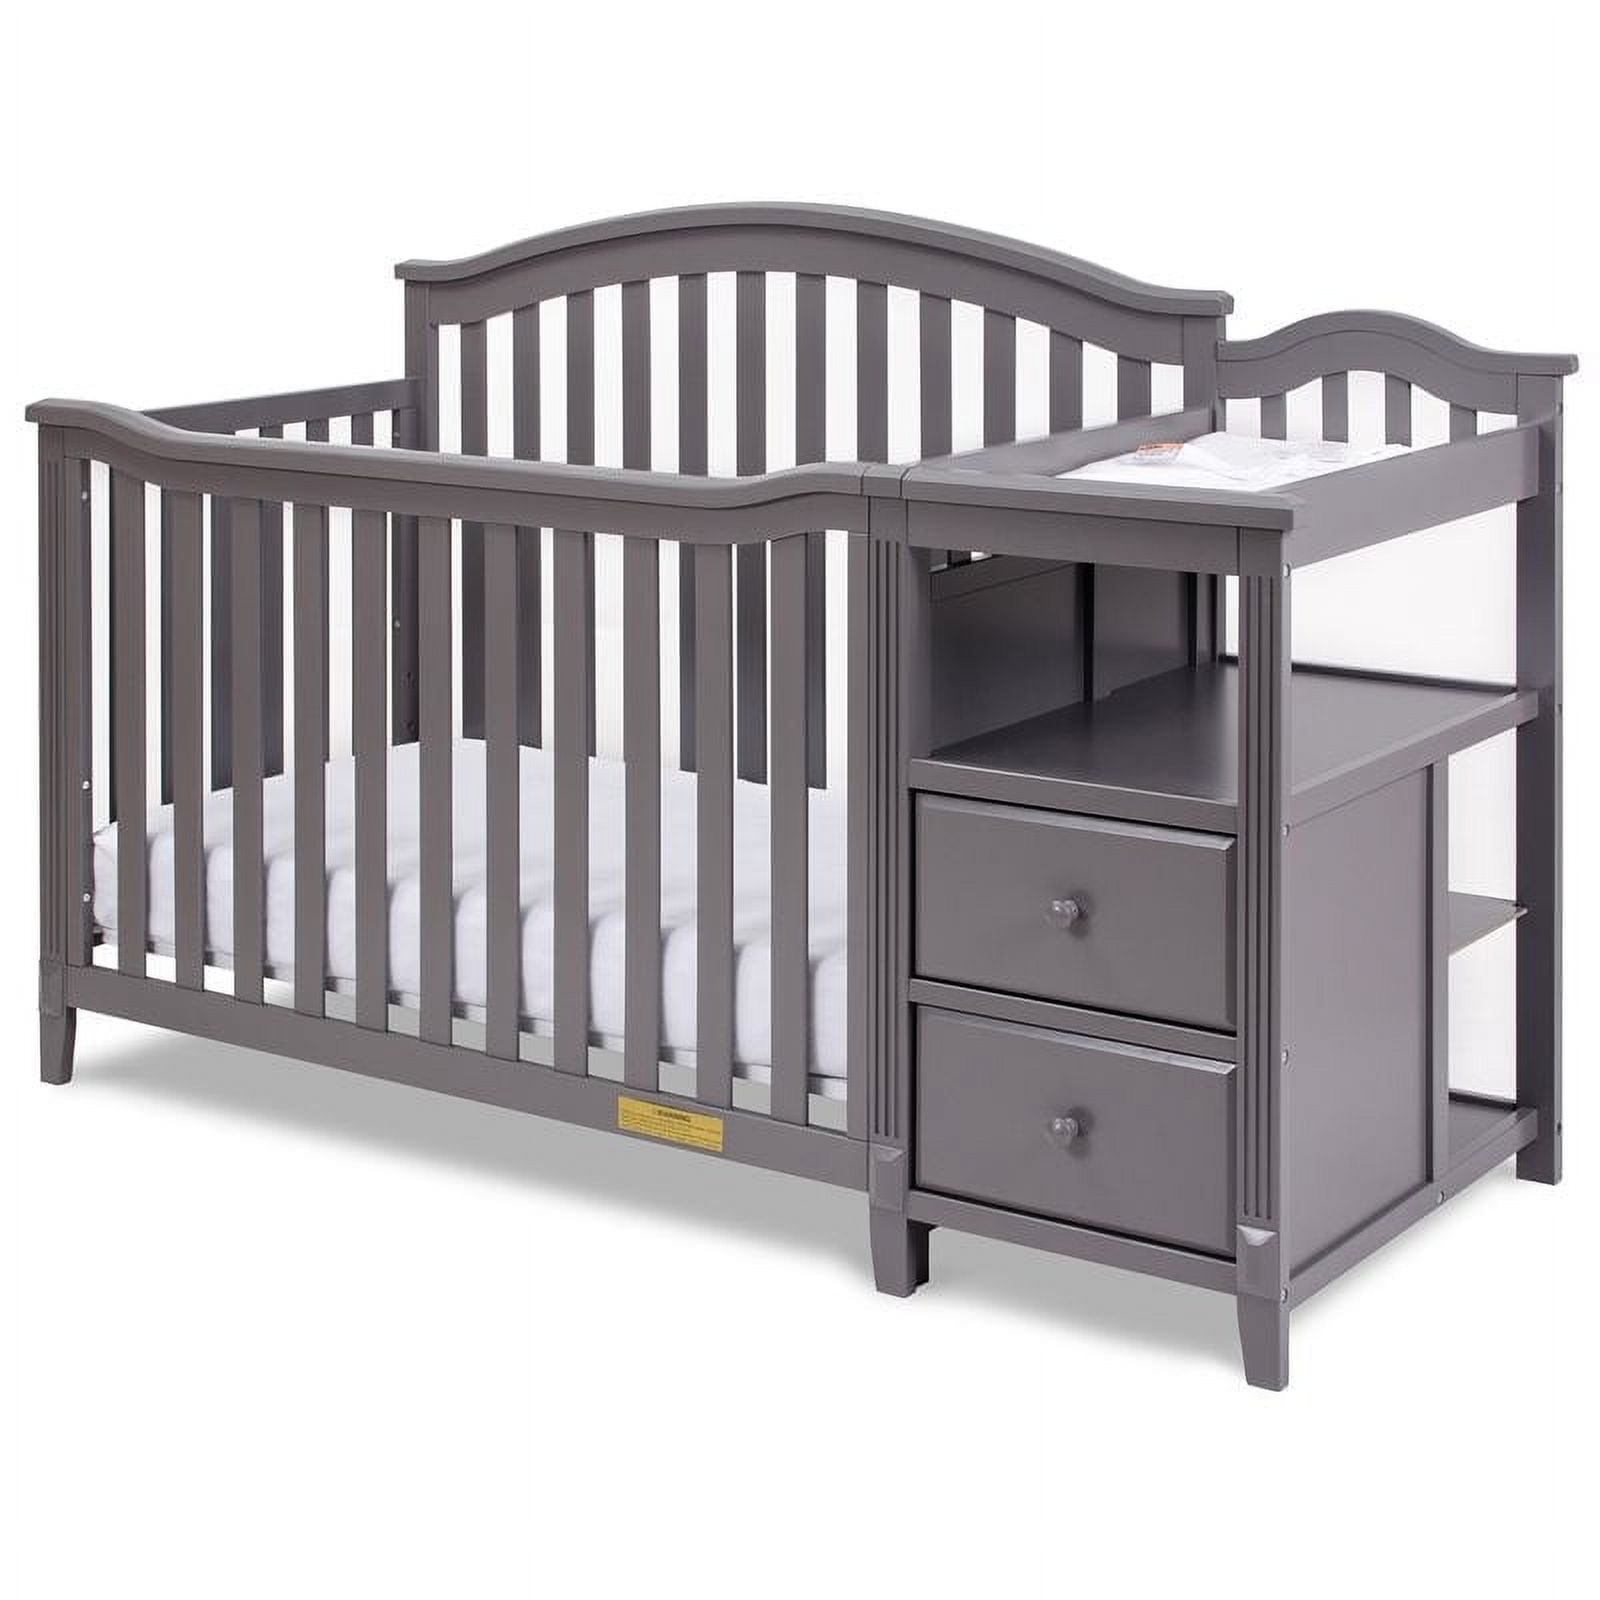 4566g Afg Kali 4-in-1 Crib With Changer, Grey